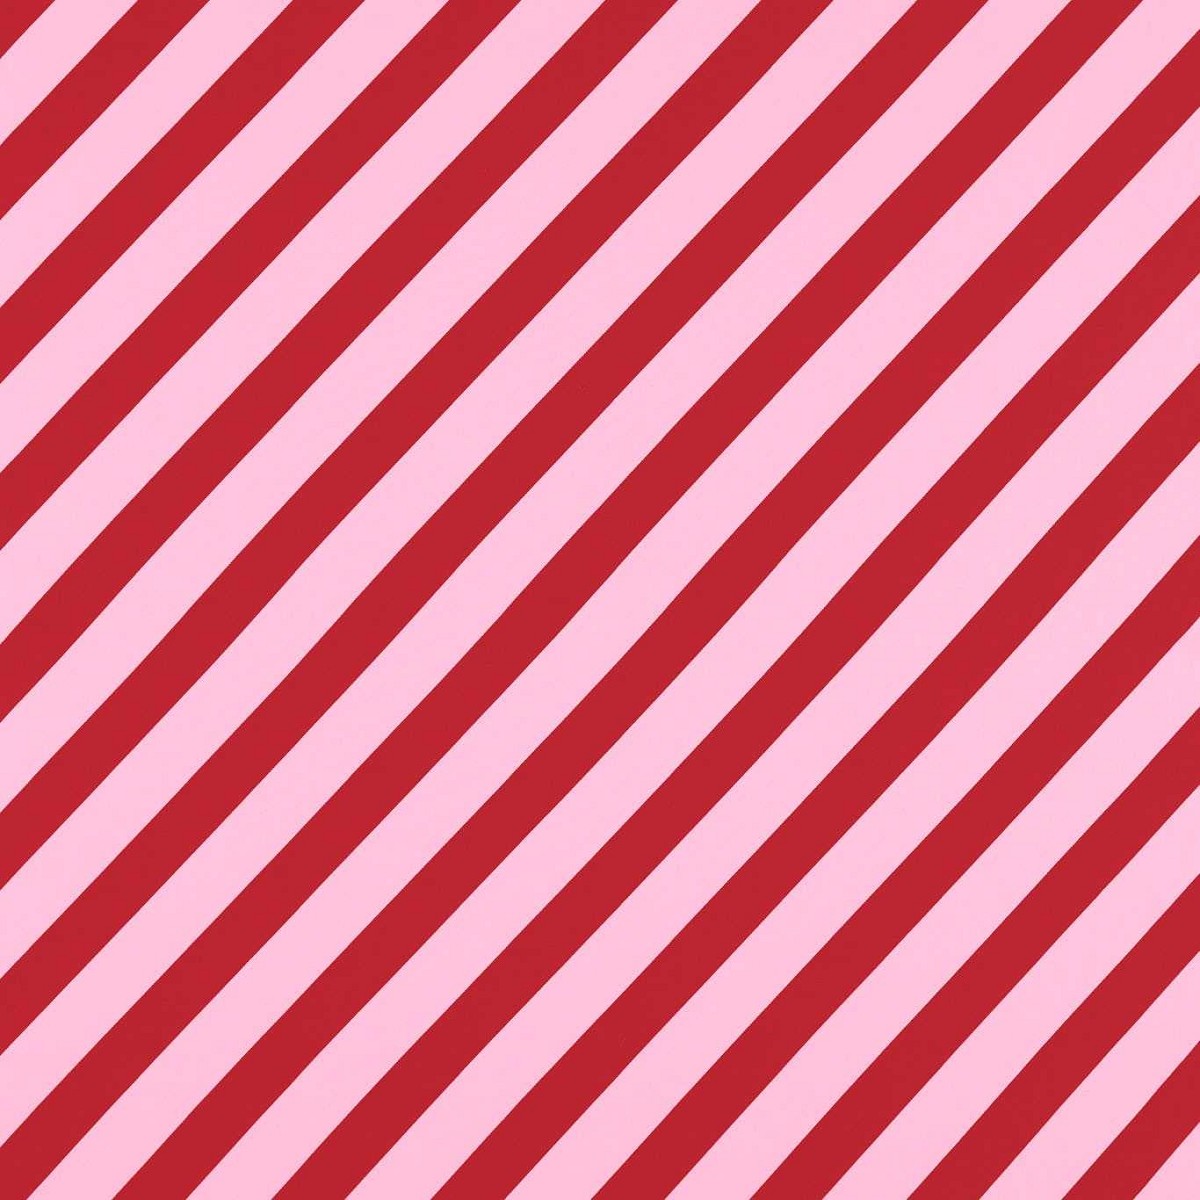 Paper Straw Stripe Ruby/Rose Fabric by Harlequin